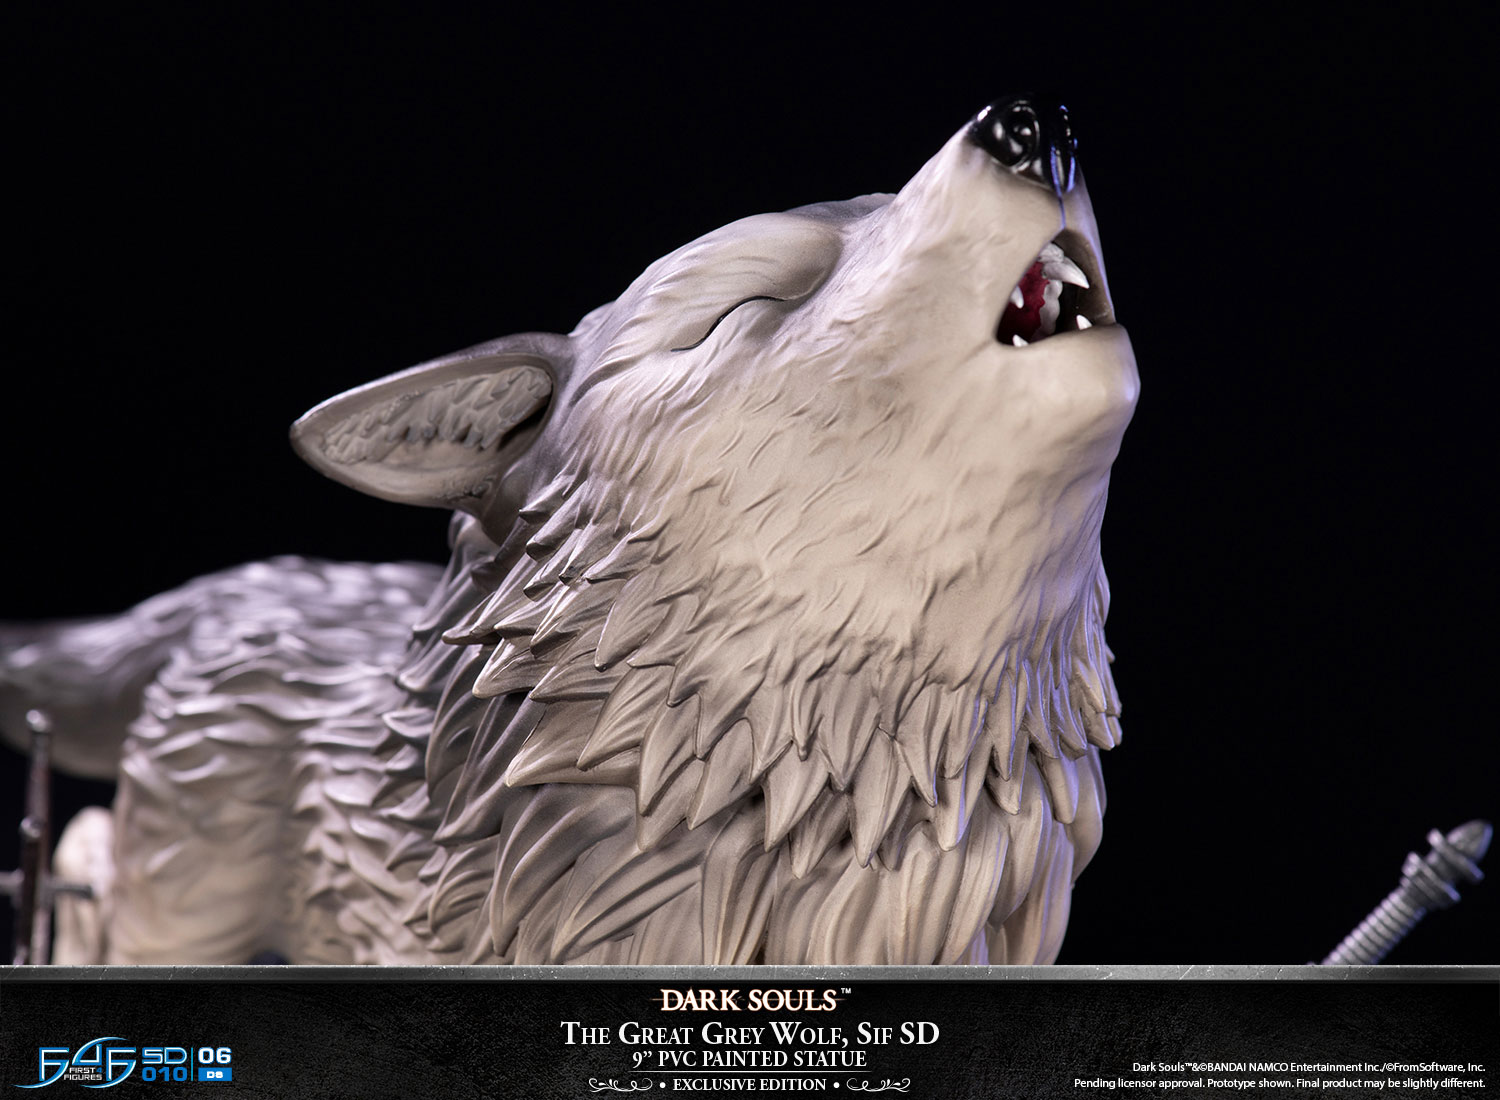 The Great Grey Wolf, Sif SD (Exclusive Edition)